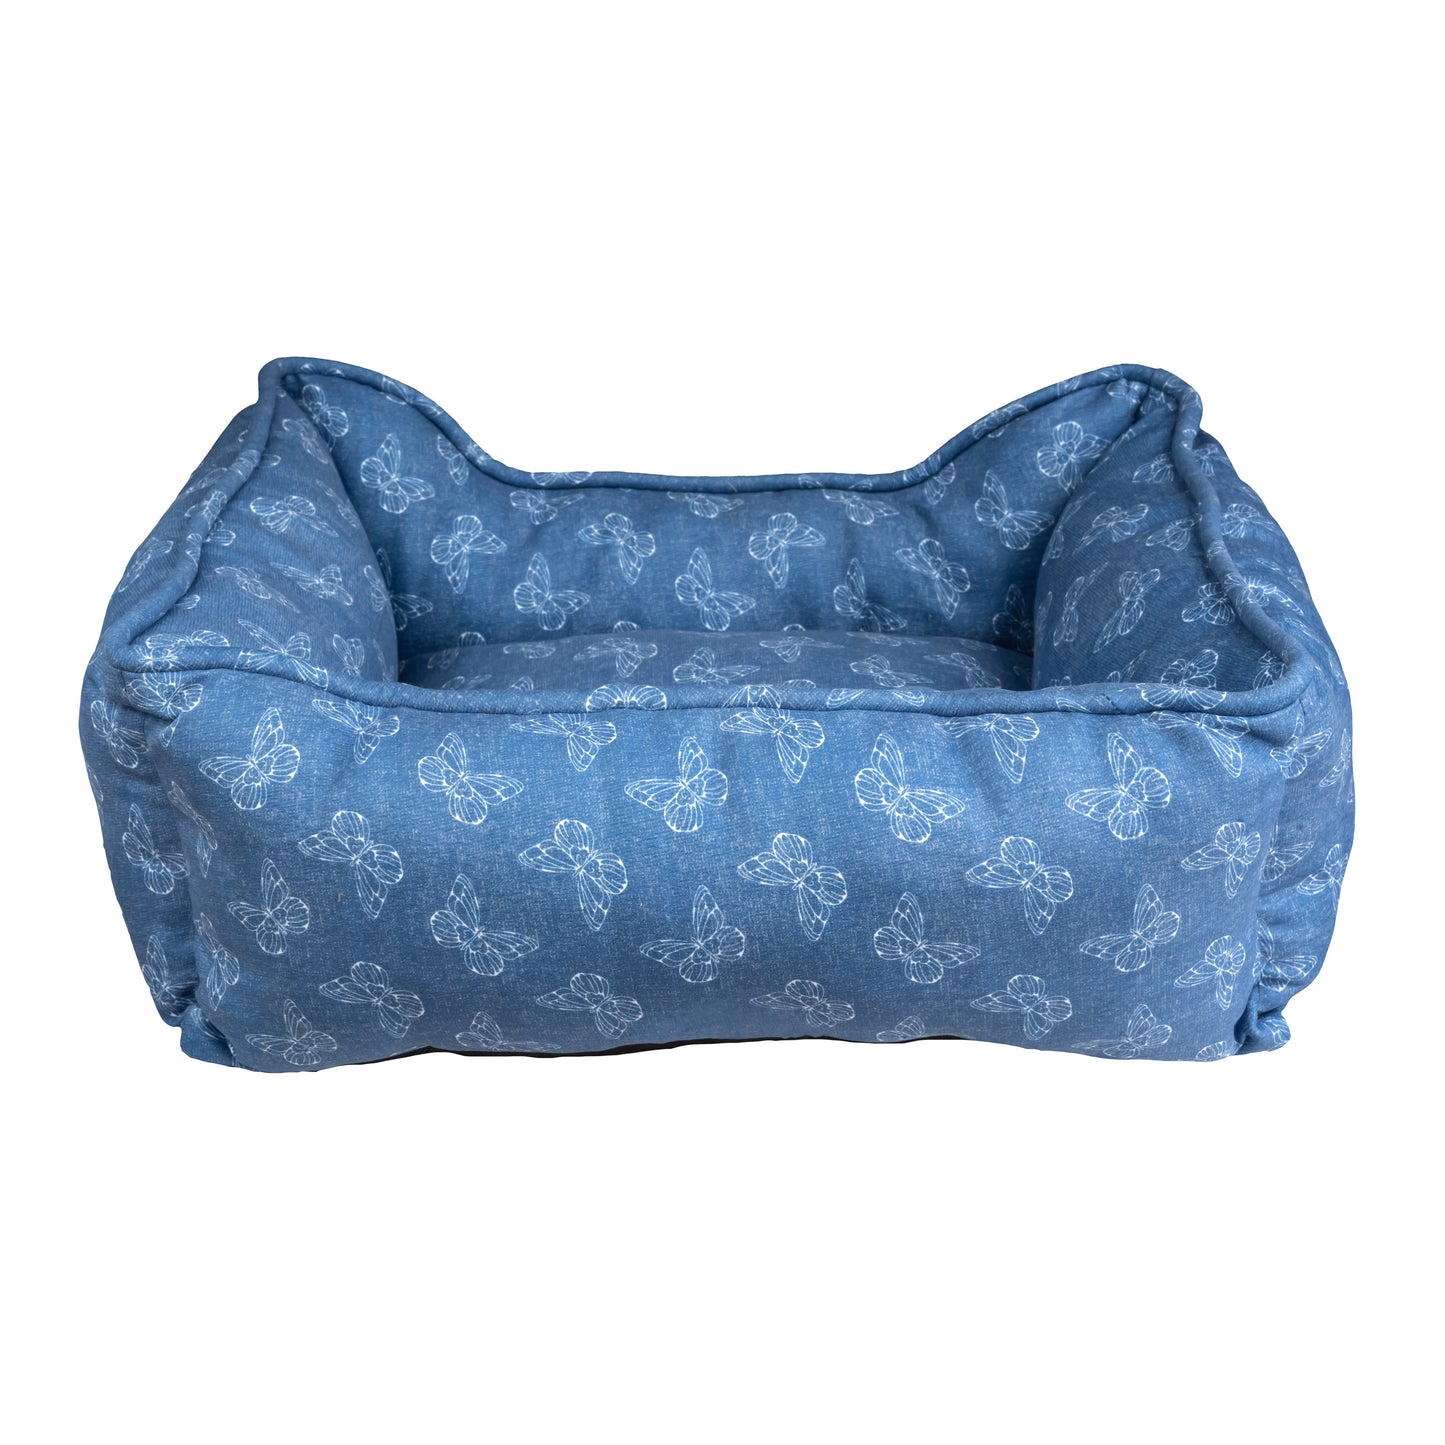 Rustic Denim Butterfly Cuddle Bed for Pets - Blue